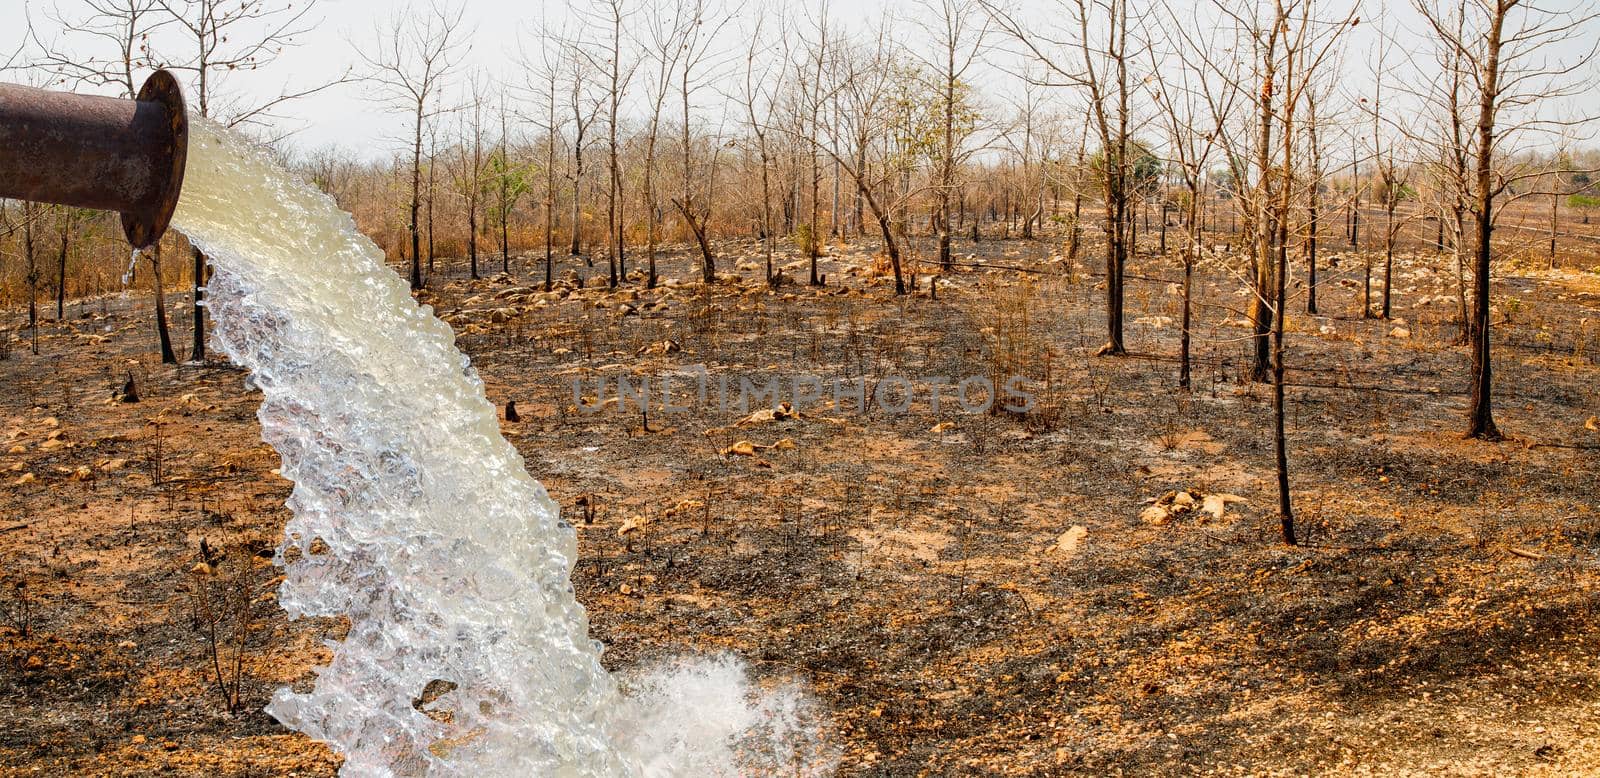 Water fill in arid area by the destruction of forests for shifting cultivation in Thailand.